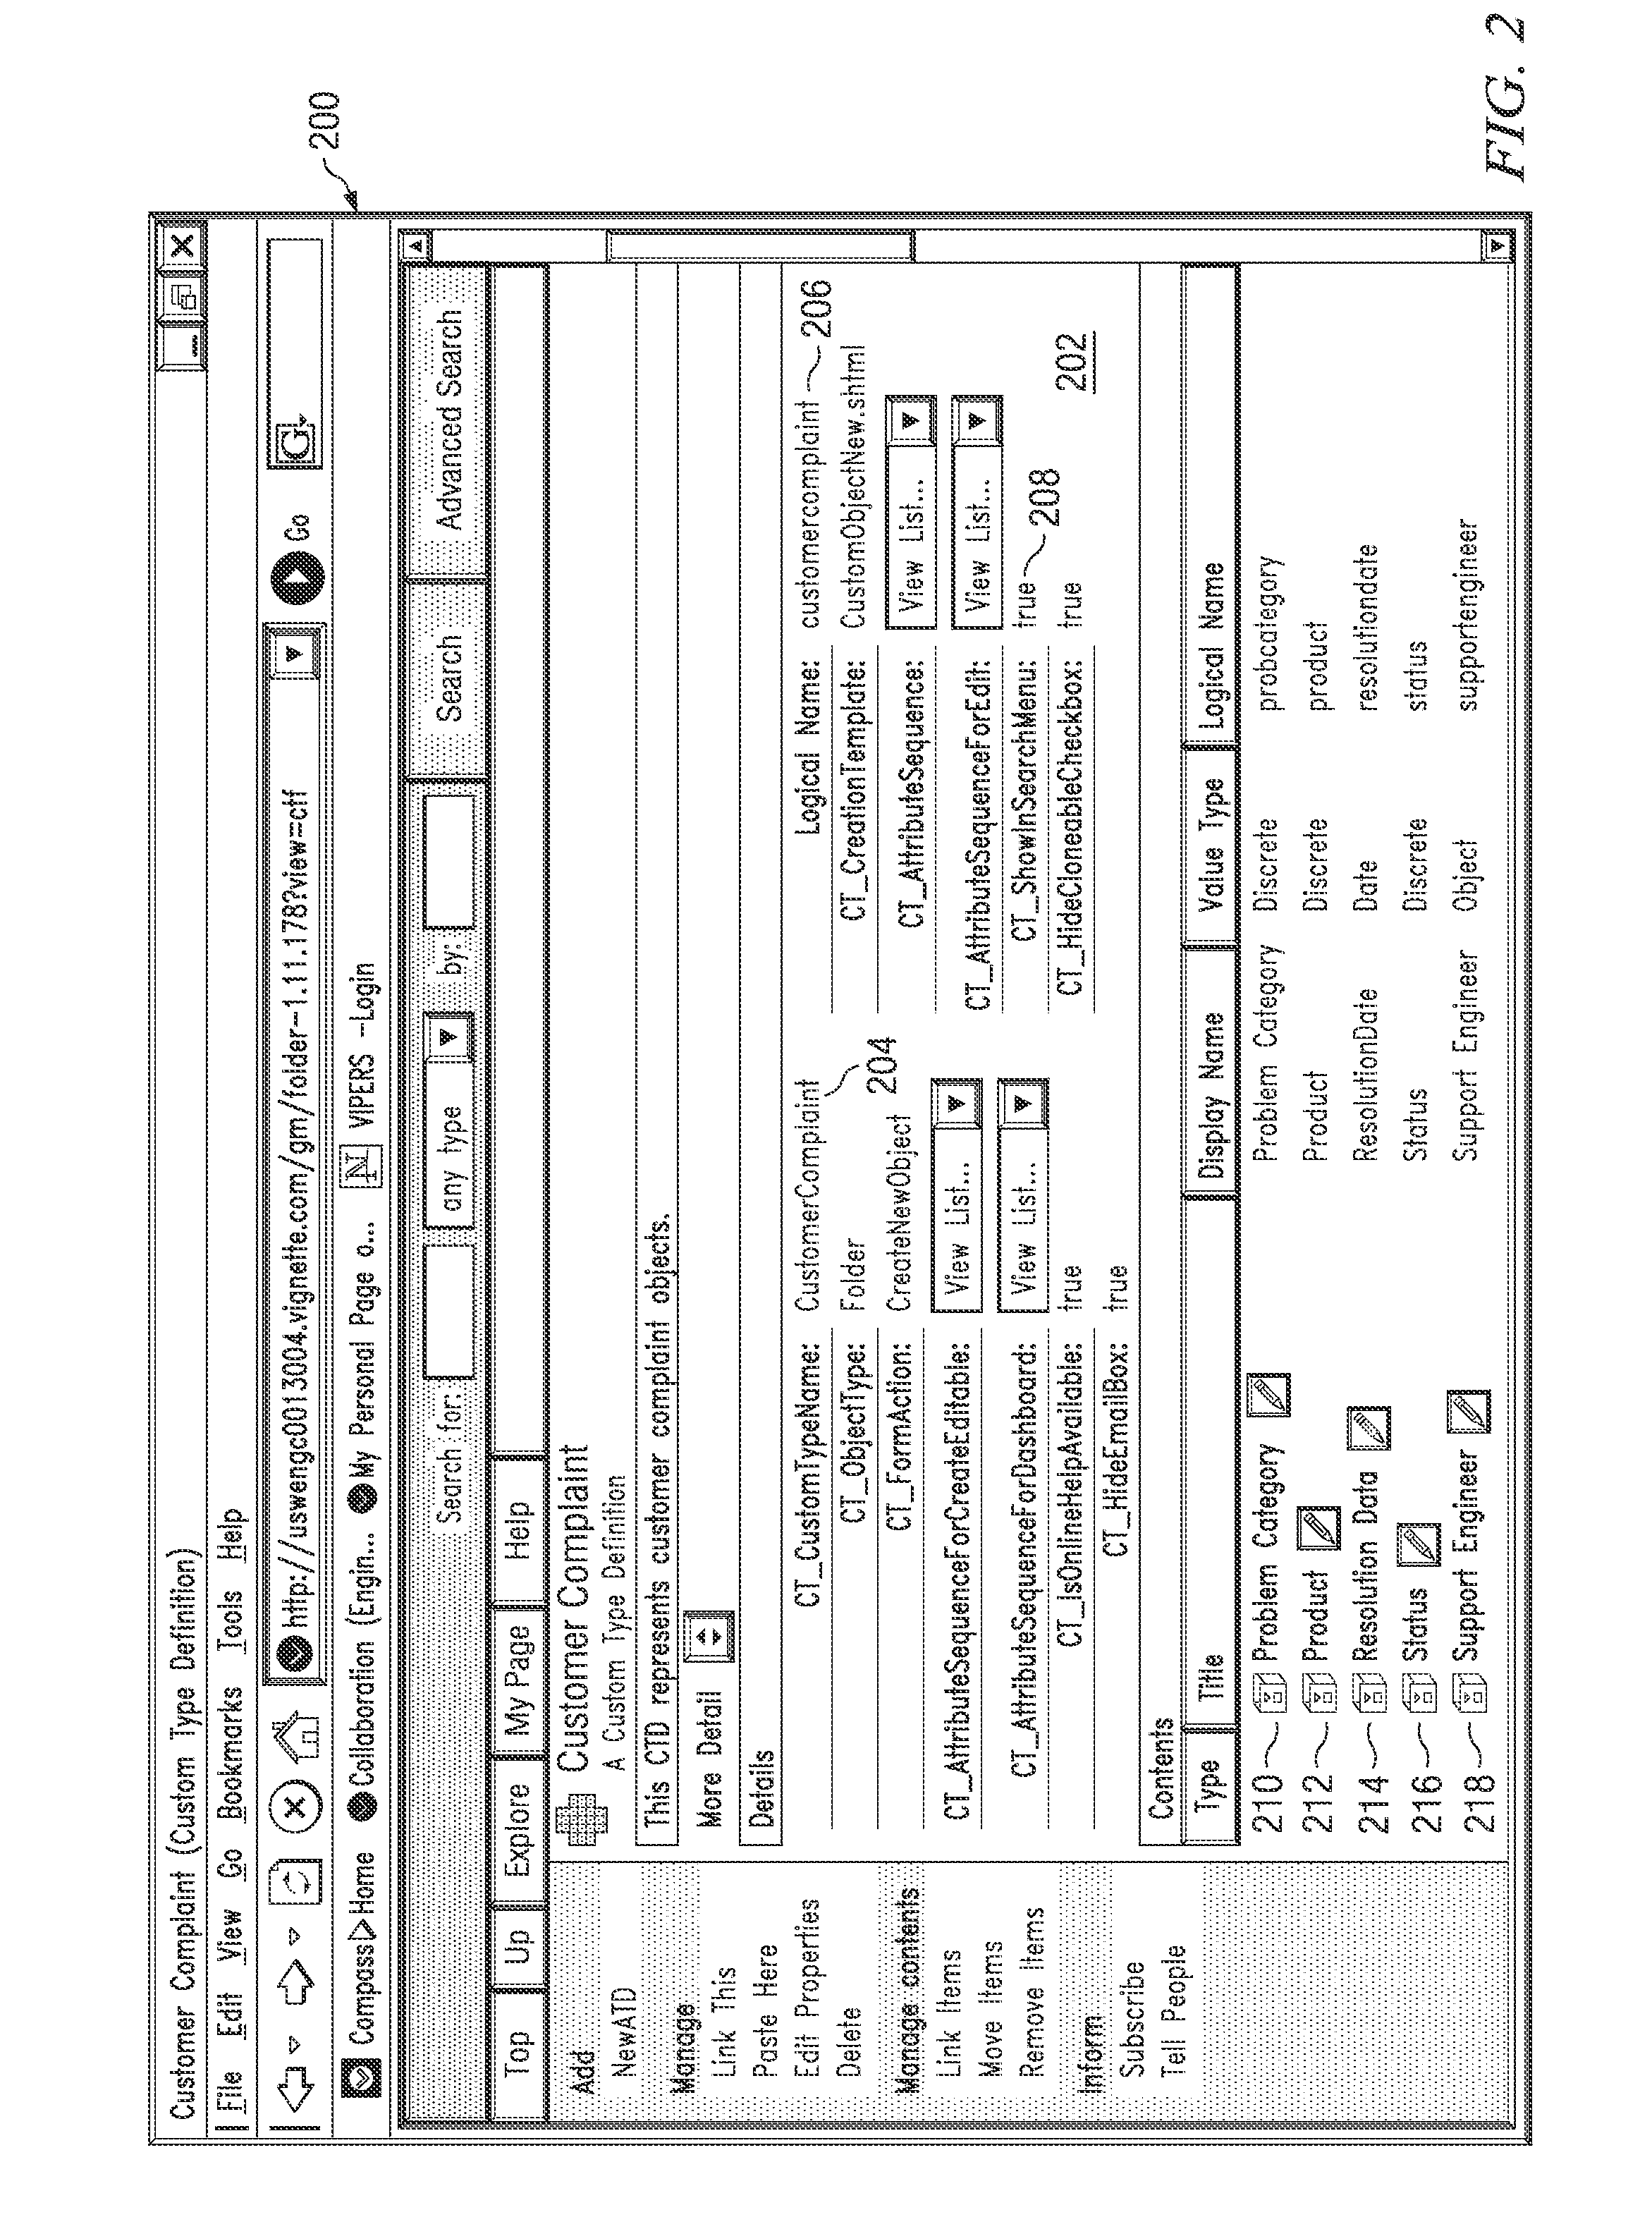 System and Method to Search and Generate Reports from Semi-Structured Data Including Dynamic Metadata